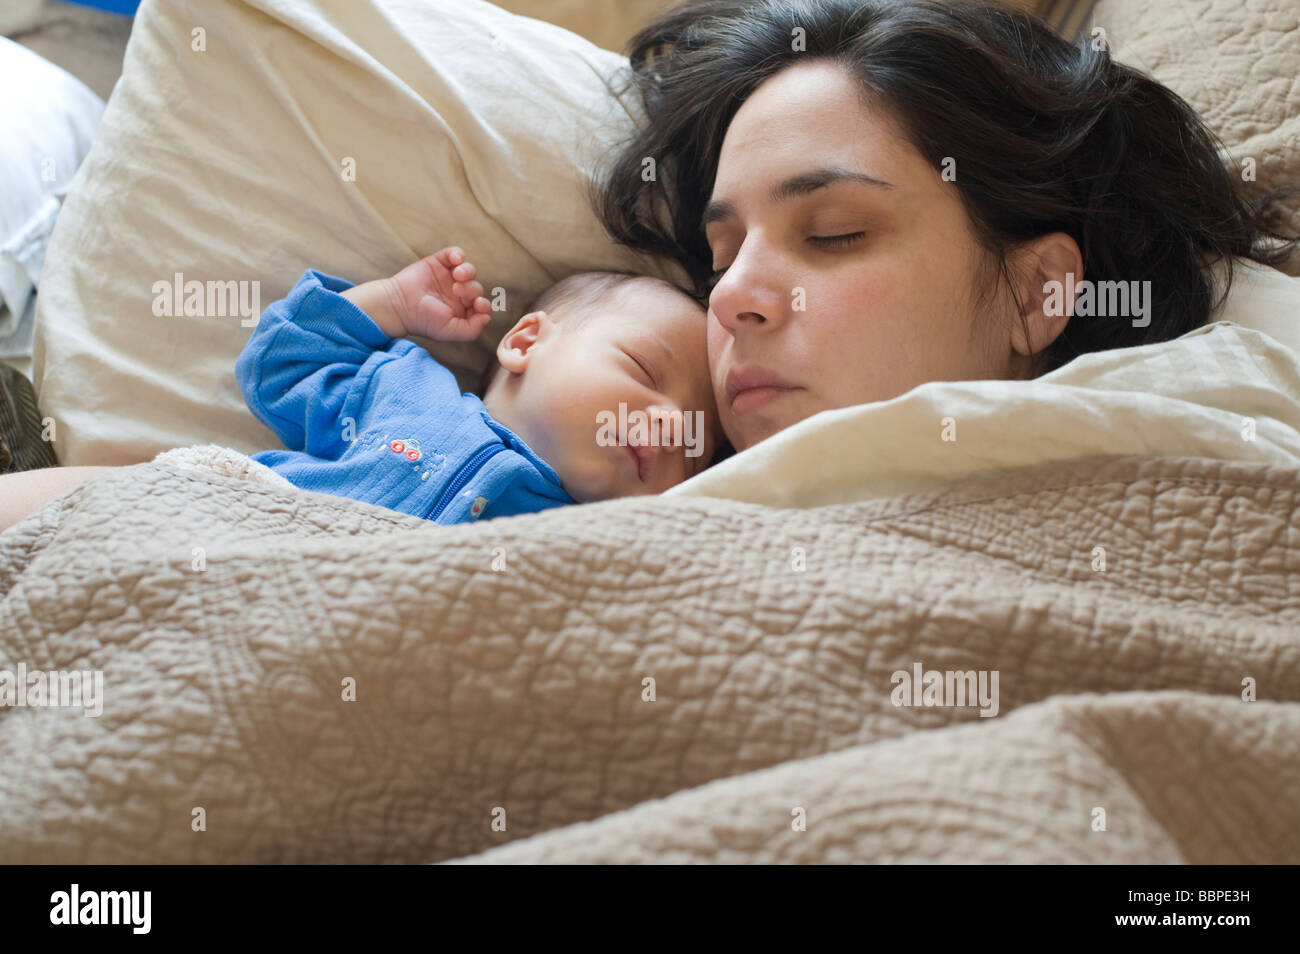 Thirty-five year old Puerto Rican woman lays in bed with her one month old baby boy Stock Photo